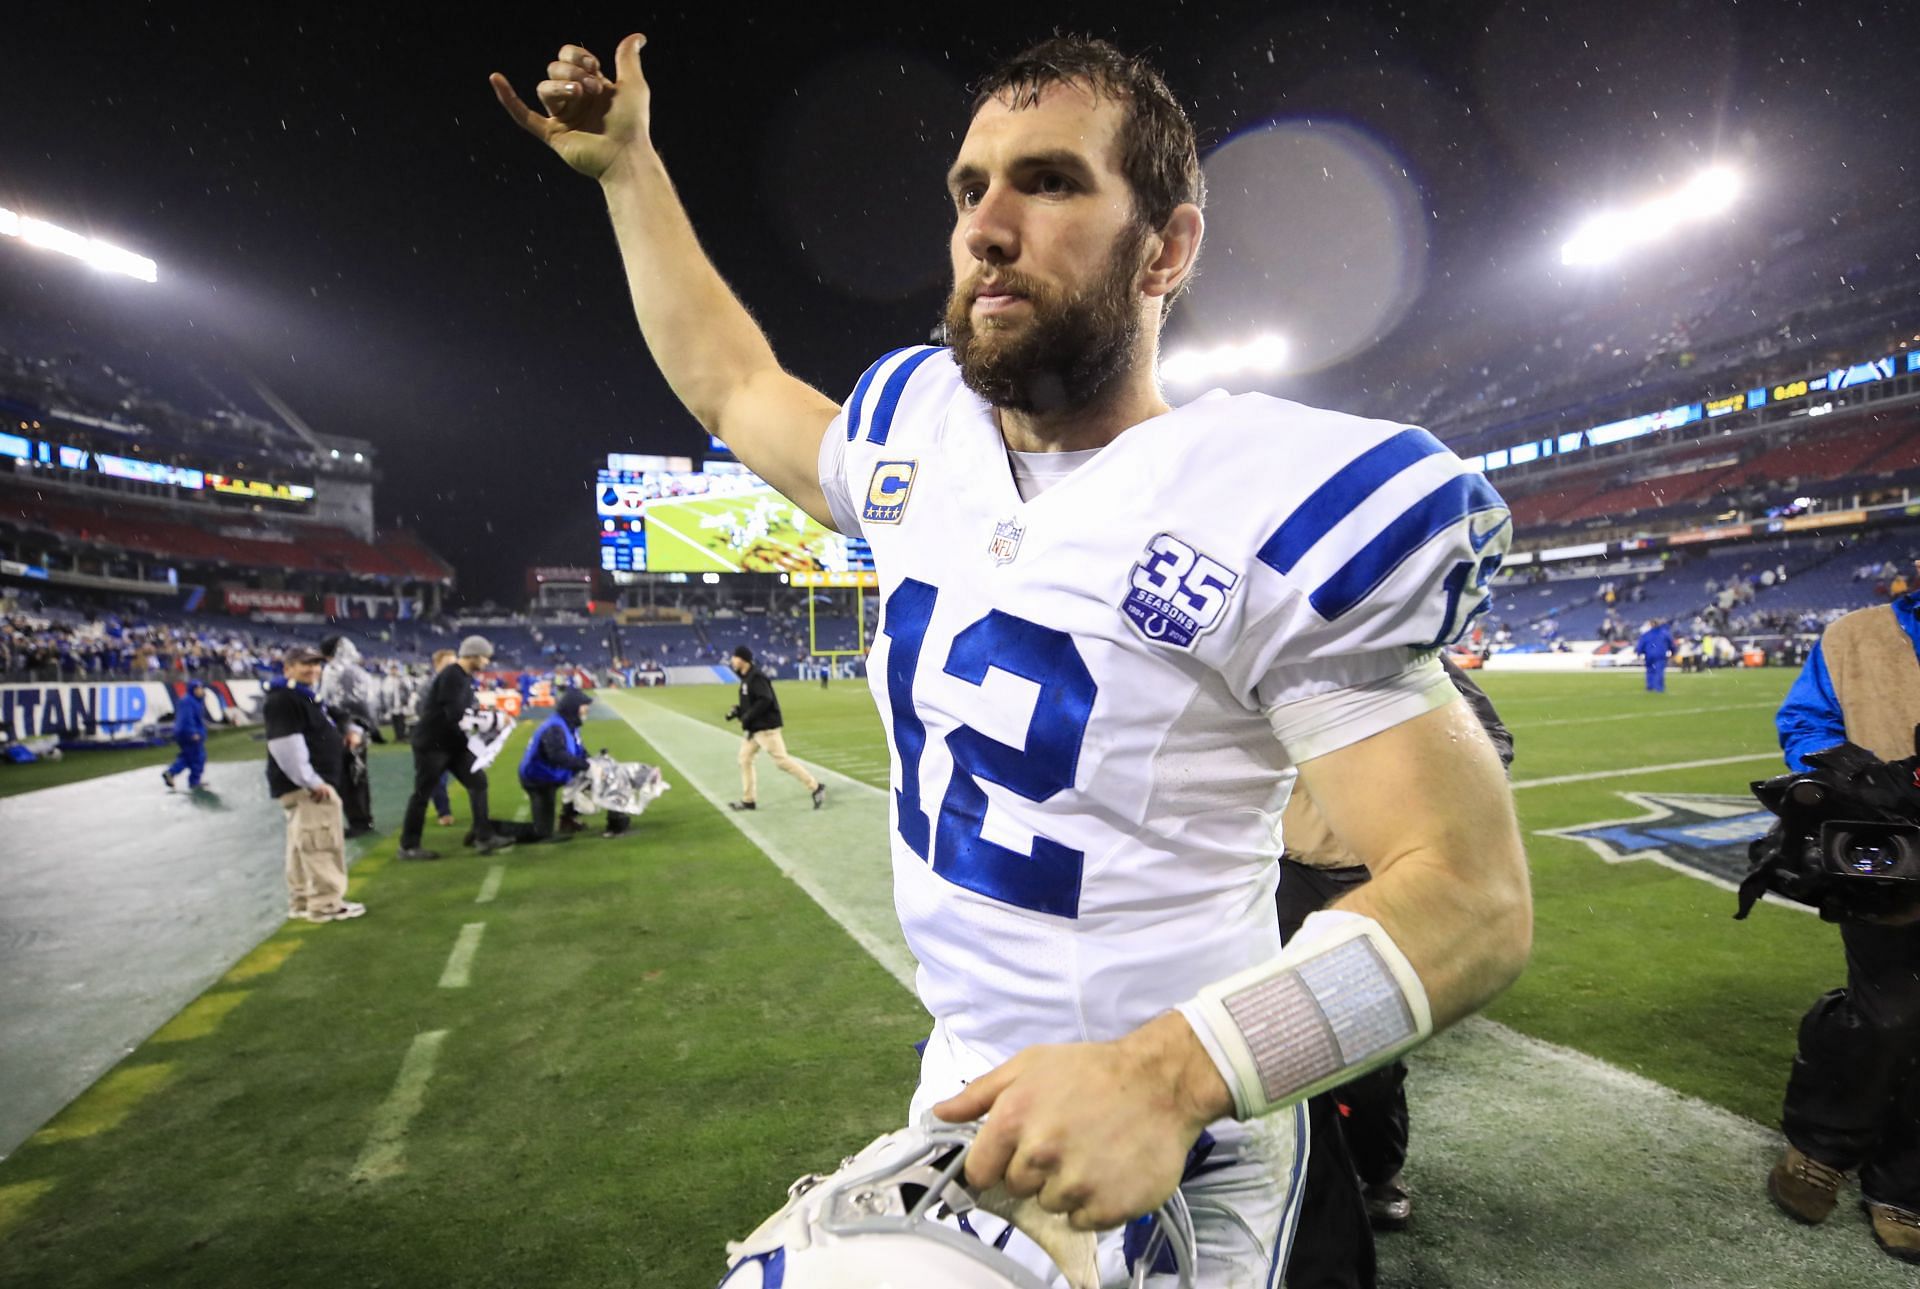 Former Indianapolis Colts QB Andrew Luck